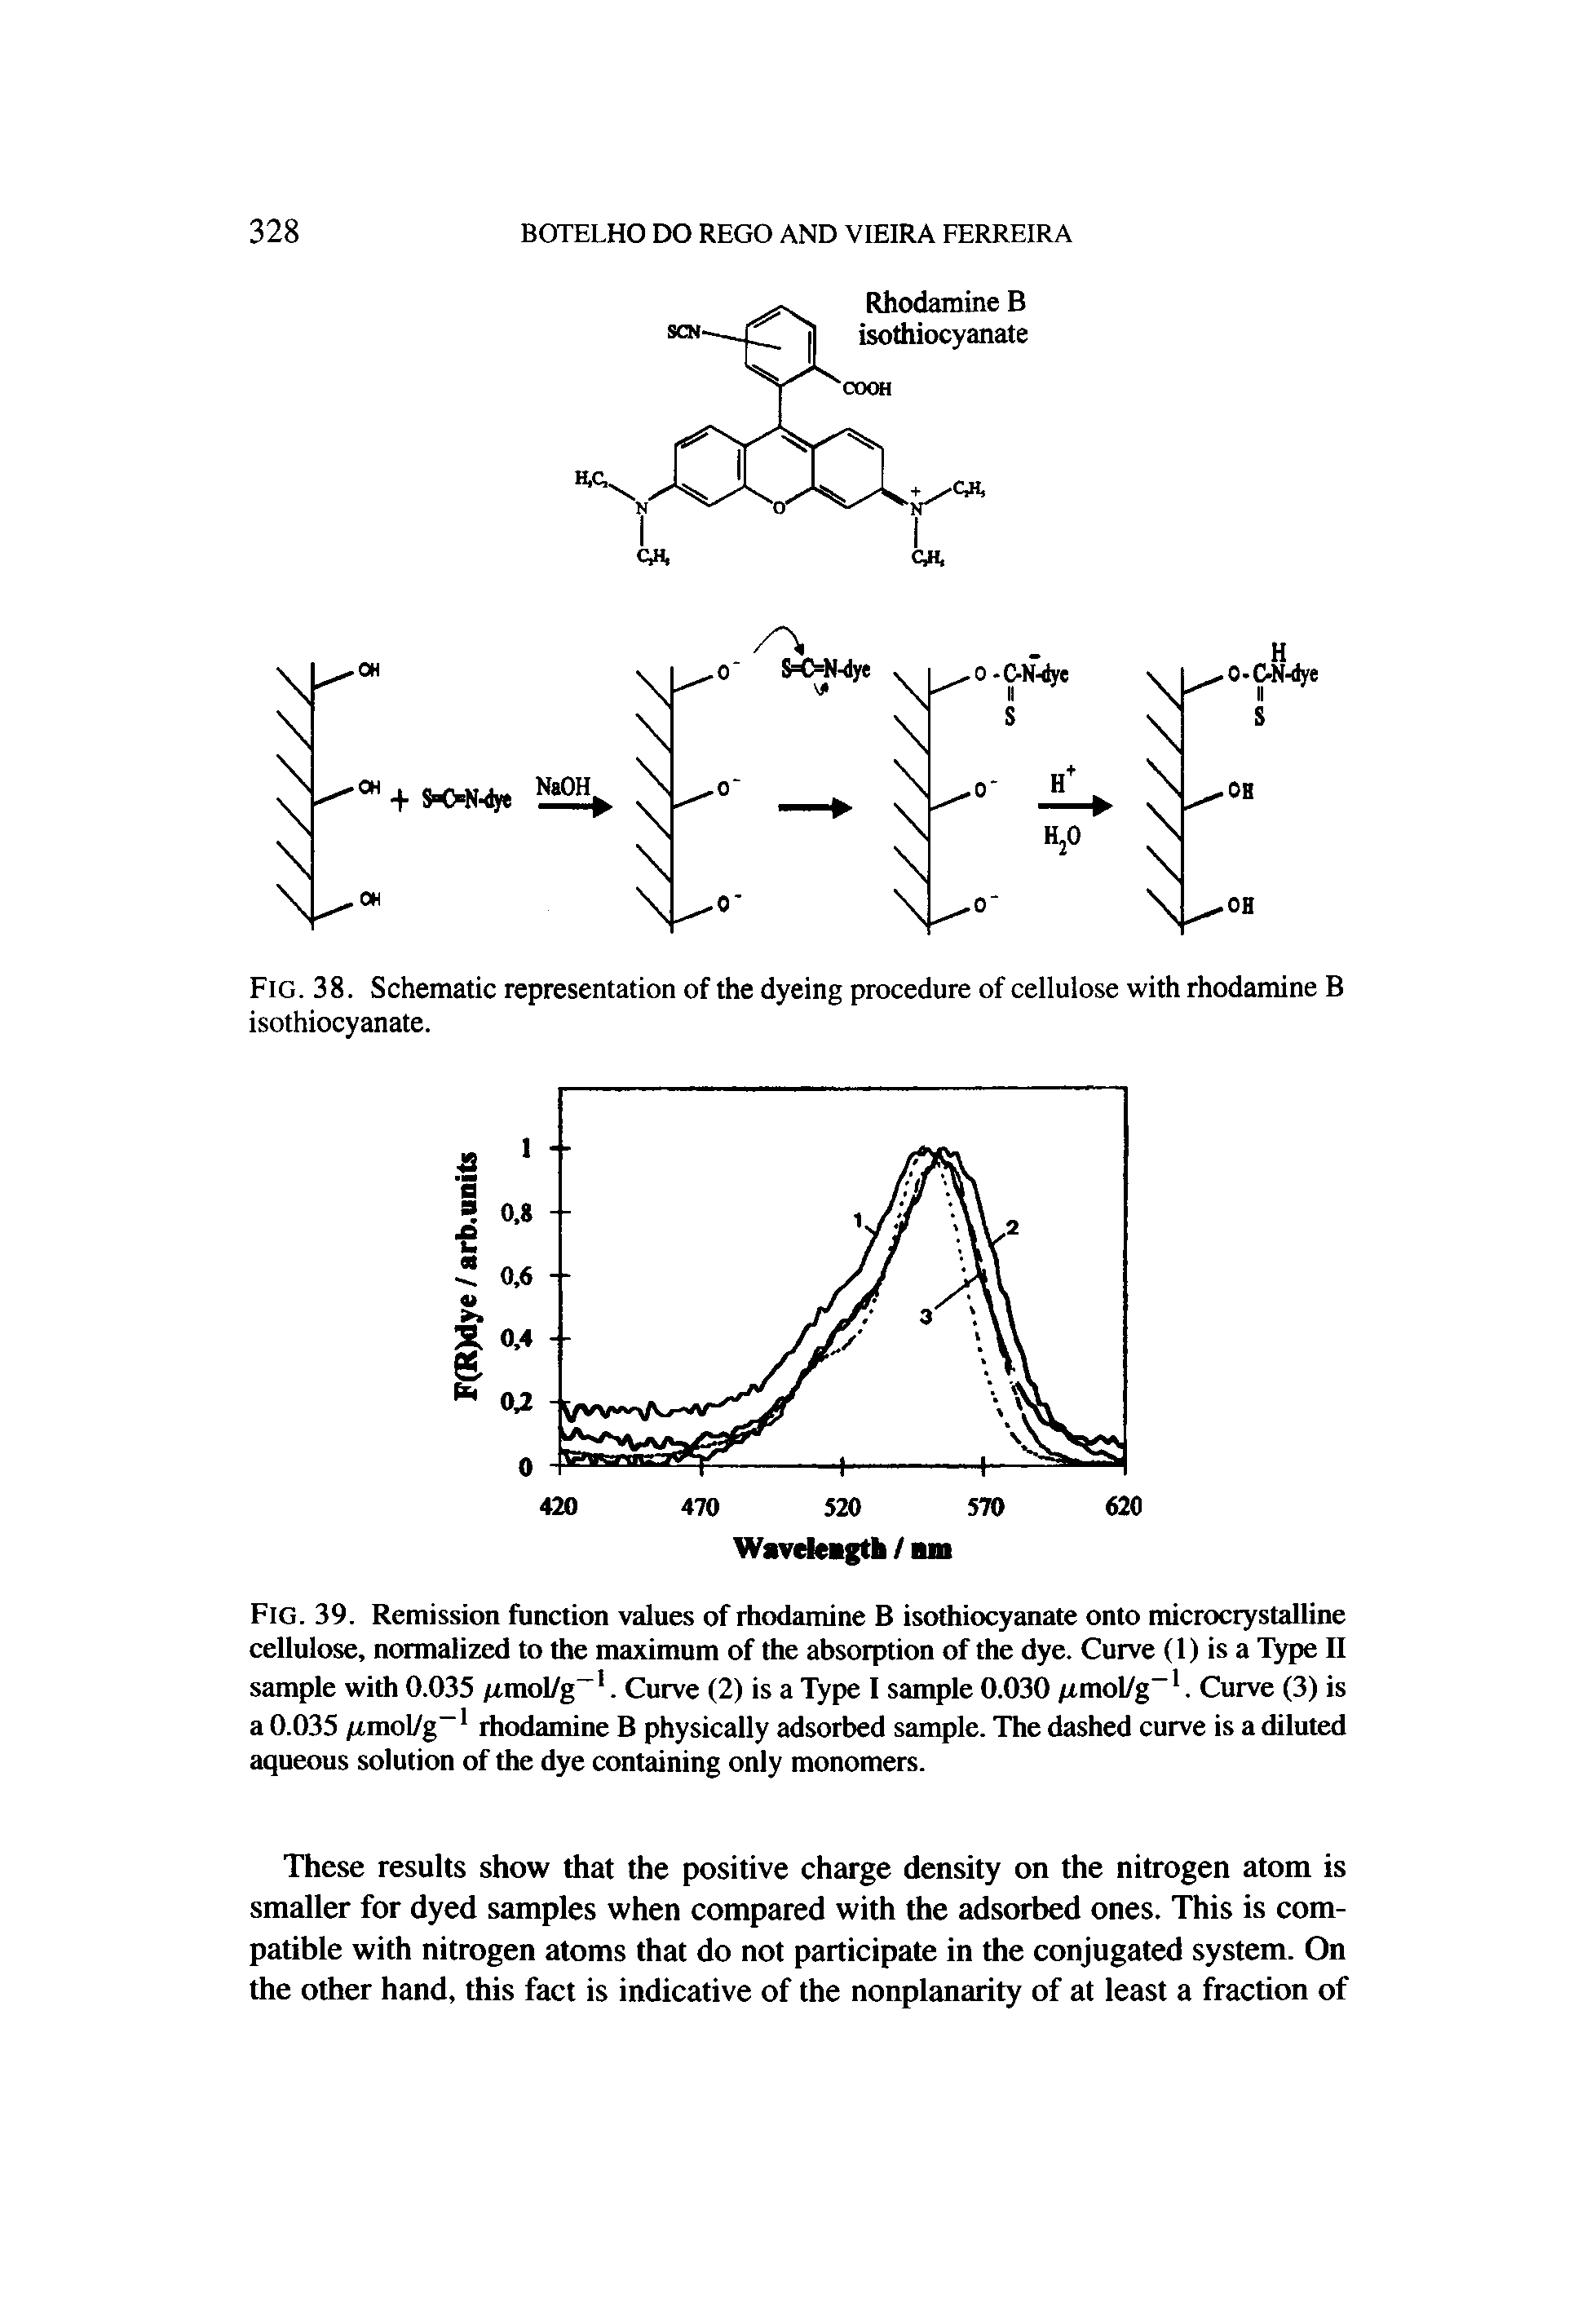 Fig. 39. Remission function values of rhodamine B isothiocyanate onto microcrystalline cellulose, normalized to the maximum of the absorption of the dye. Curve (1) is a T3 pe II sample with 0.035 /i.mol/g. Curve (2) is a Type I sample 0.030 /tmol/g . Curve (3) is...